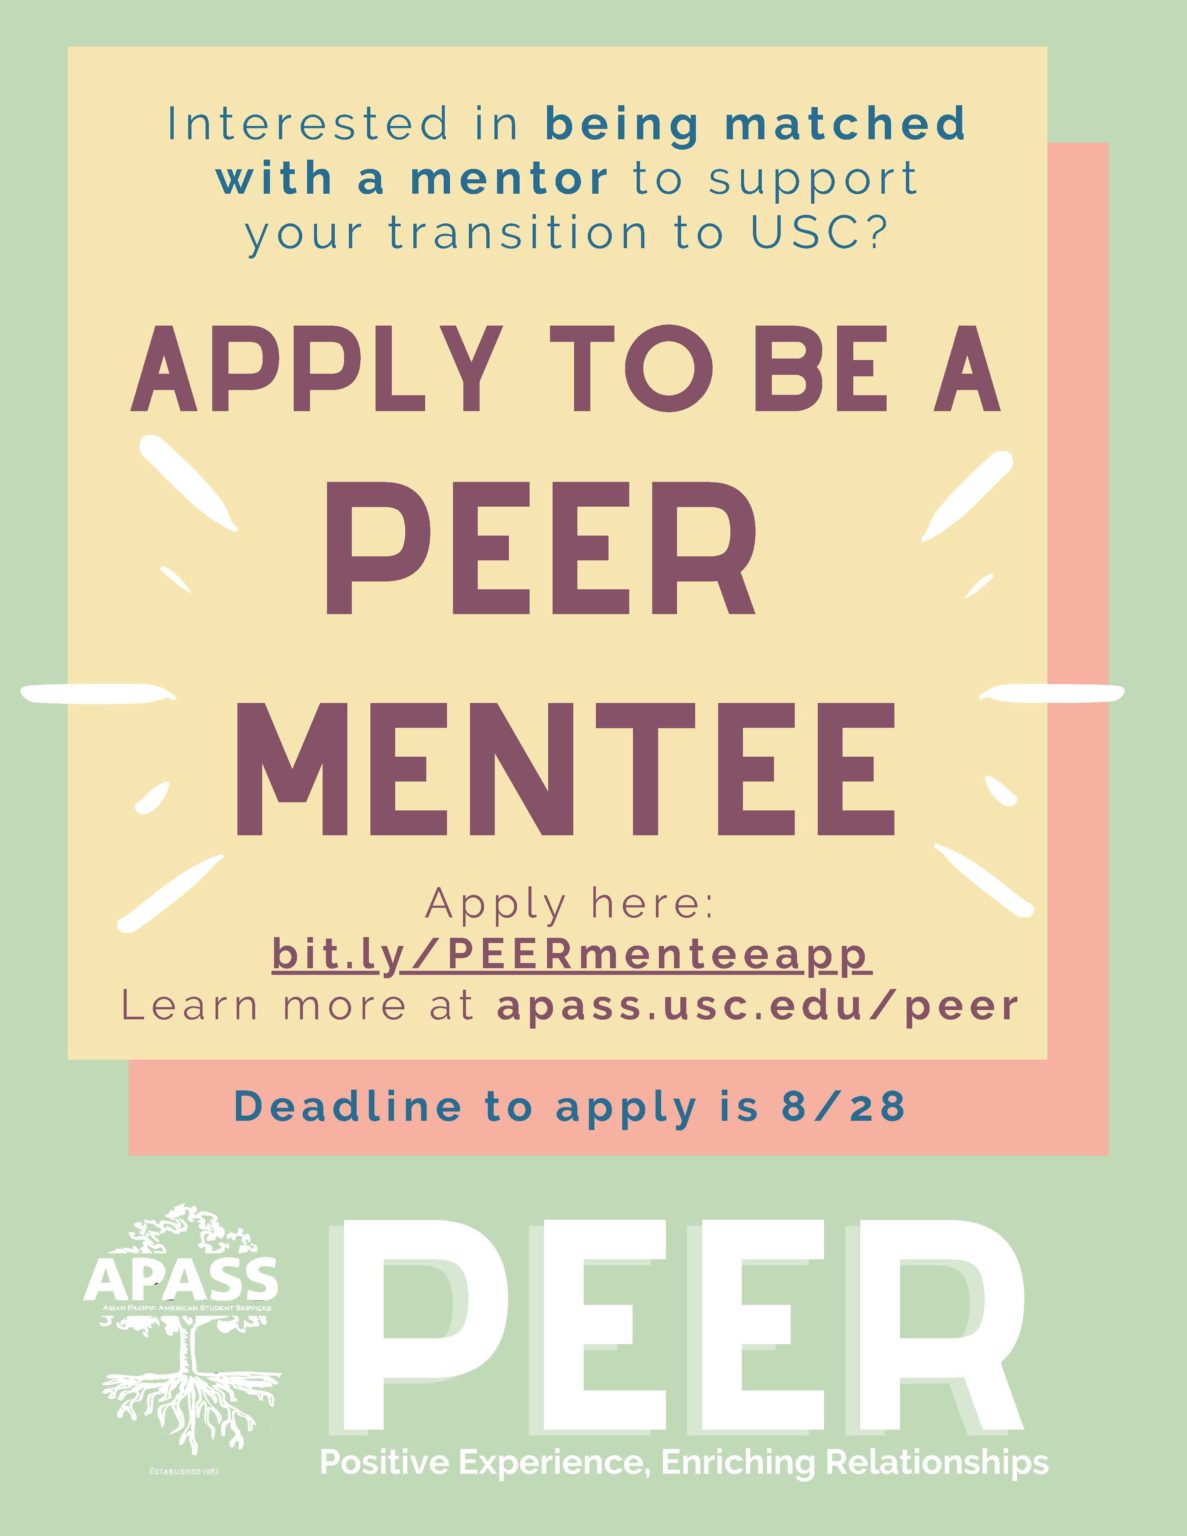 Apply to be a PEER mentee flyer